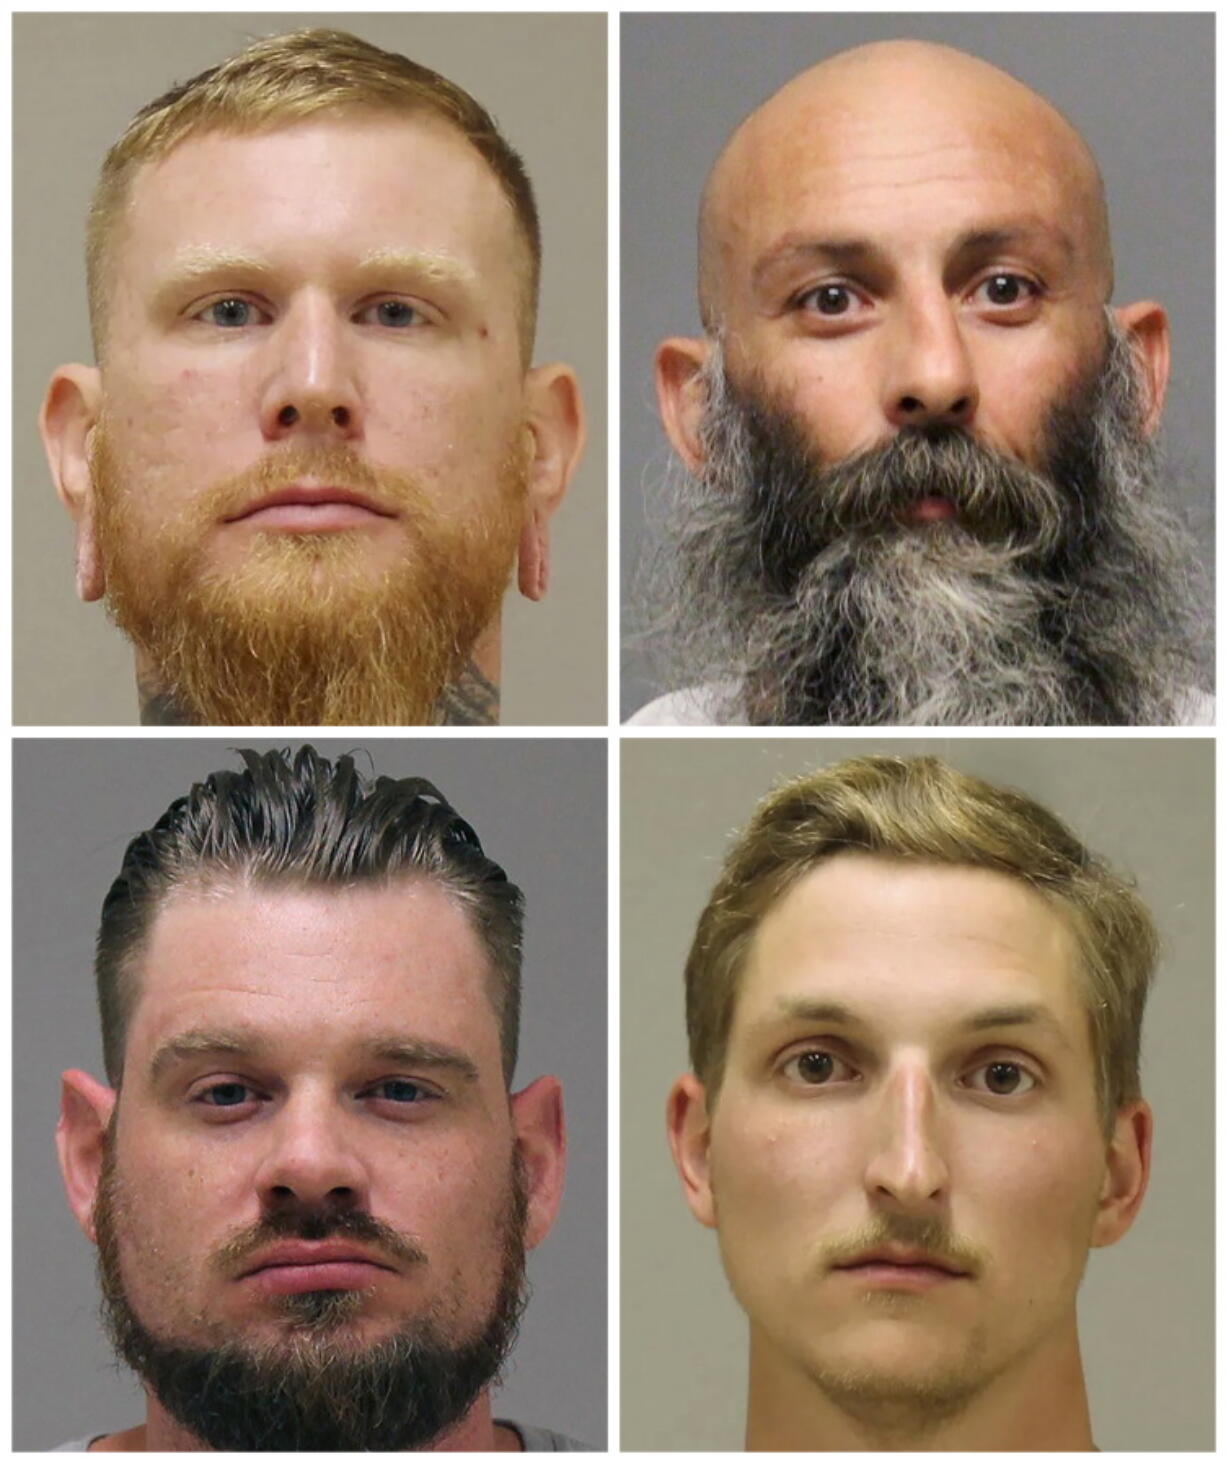 FILE - This combination of photos provided by the Kent County Sheriff and the Delaware Department of Justice shows, top row from left, Brandon Caserta and Barry Croft; and bottom row from left, Adam Dean Fox and Daniel Harris. The four members of anti-government groups are facing trial in March 2022 on federal charges accusing them in a plot to abduct Michigan's Democratic Gov. Gretchen Whitmer in 2020. Jury selection begins Tuesday, March 8, 2022, in a trial the presiding judge at the U.S. District Court courthouse in Grand Rapids, Mich., said could take over a month.